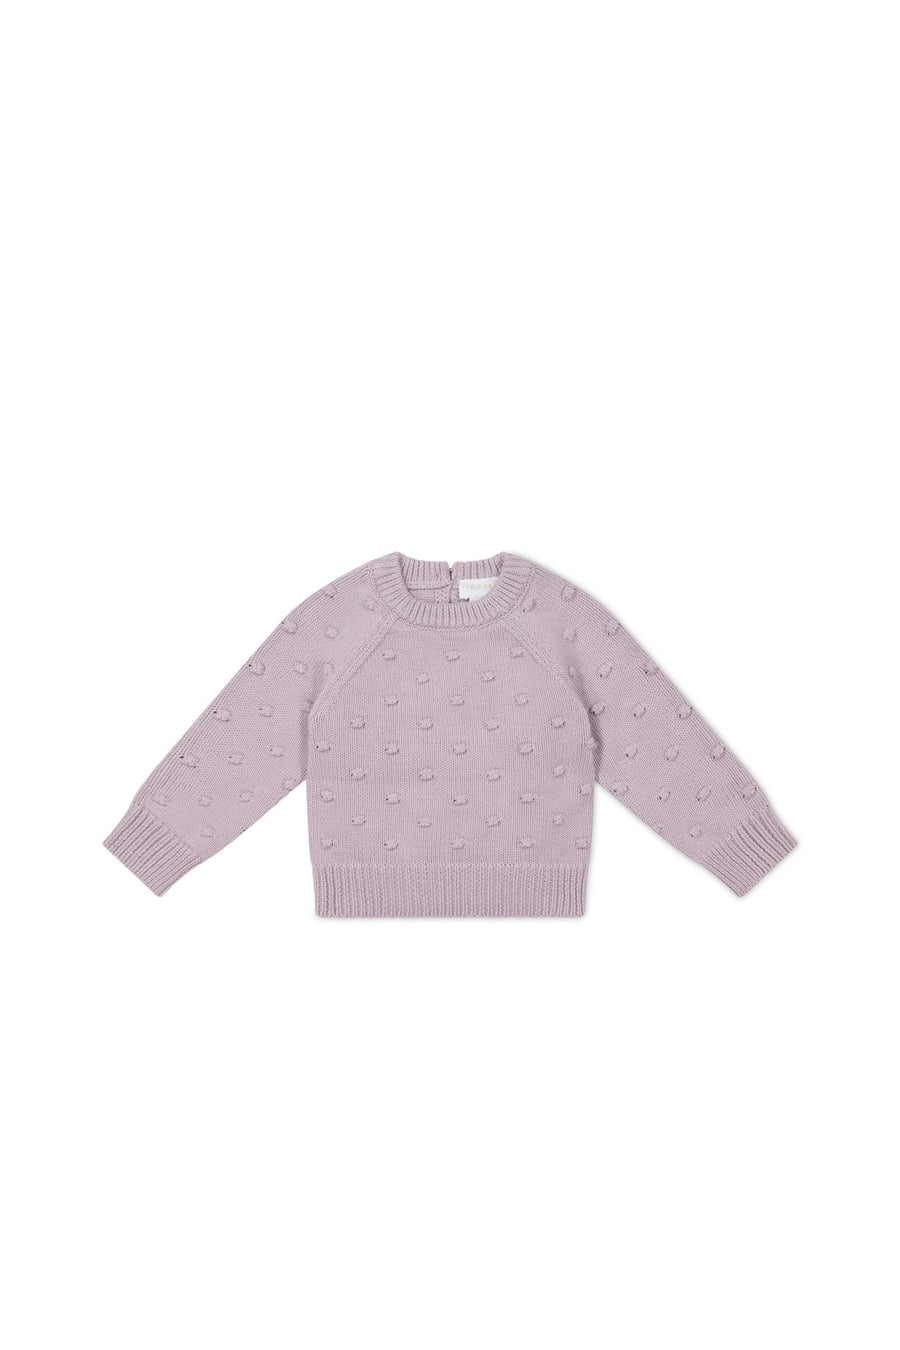 Dotty Knit Jumper - Muted Violet Childrens Jumper from Jamie Kay NZ